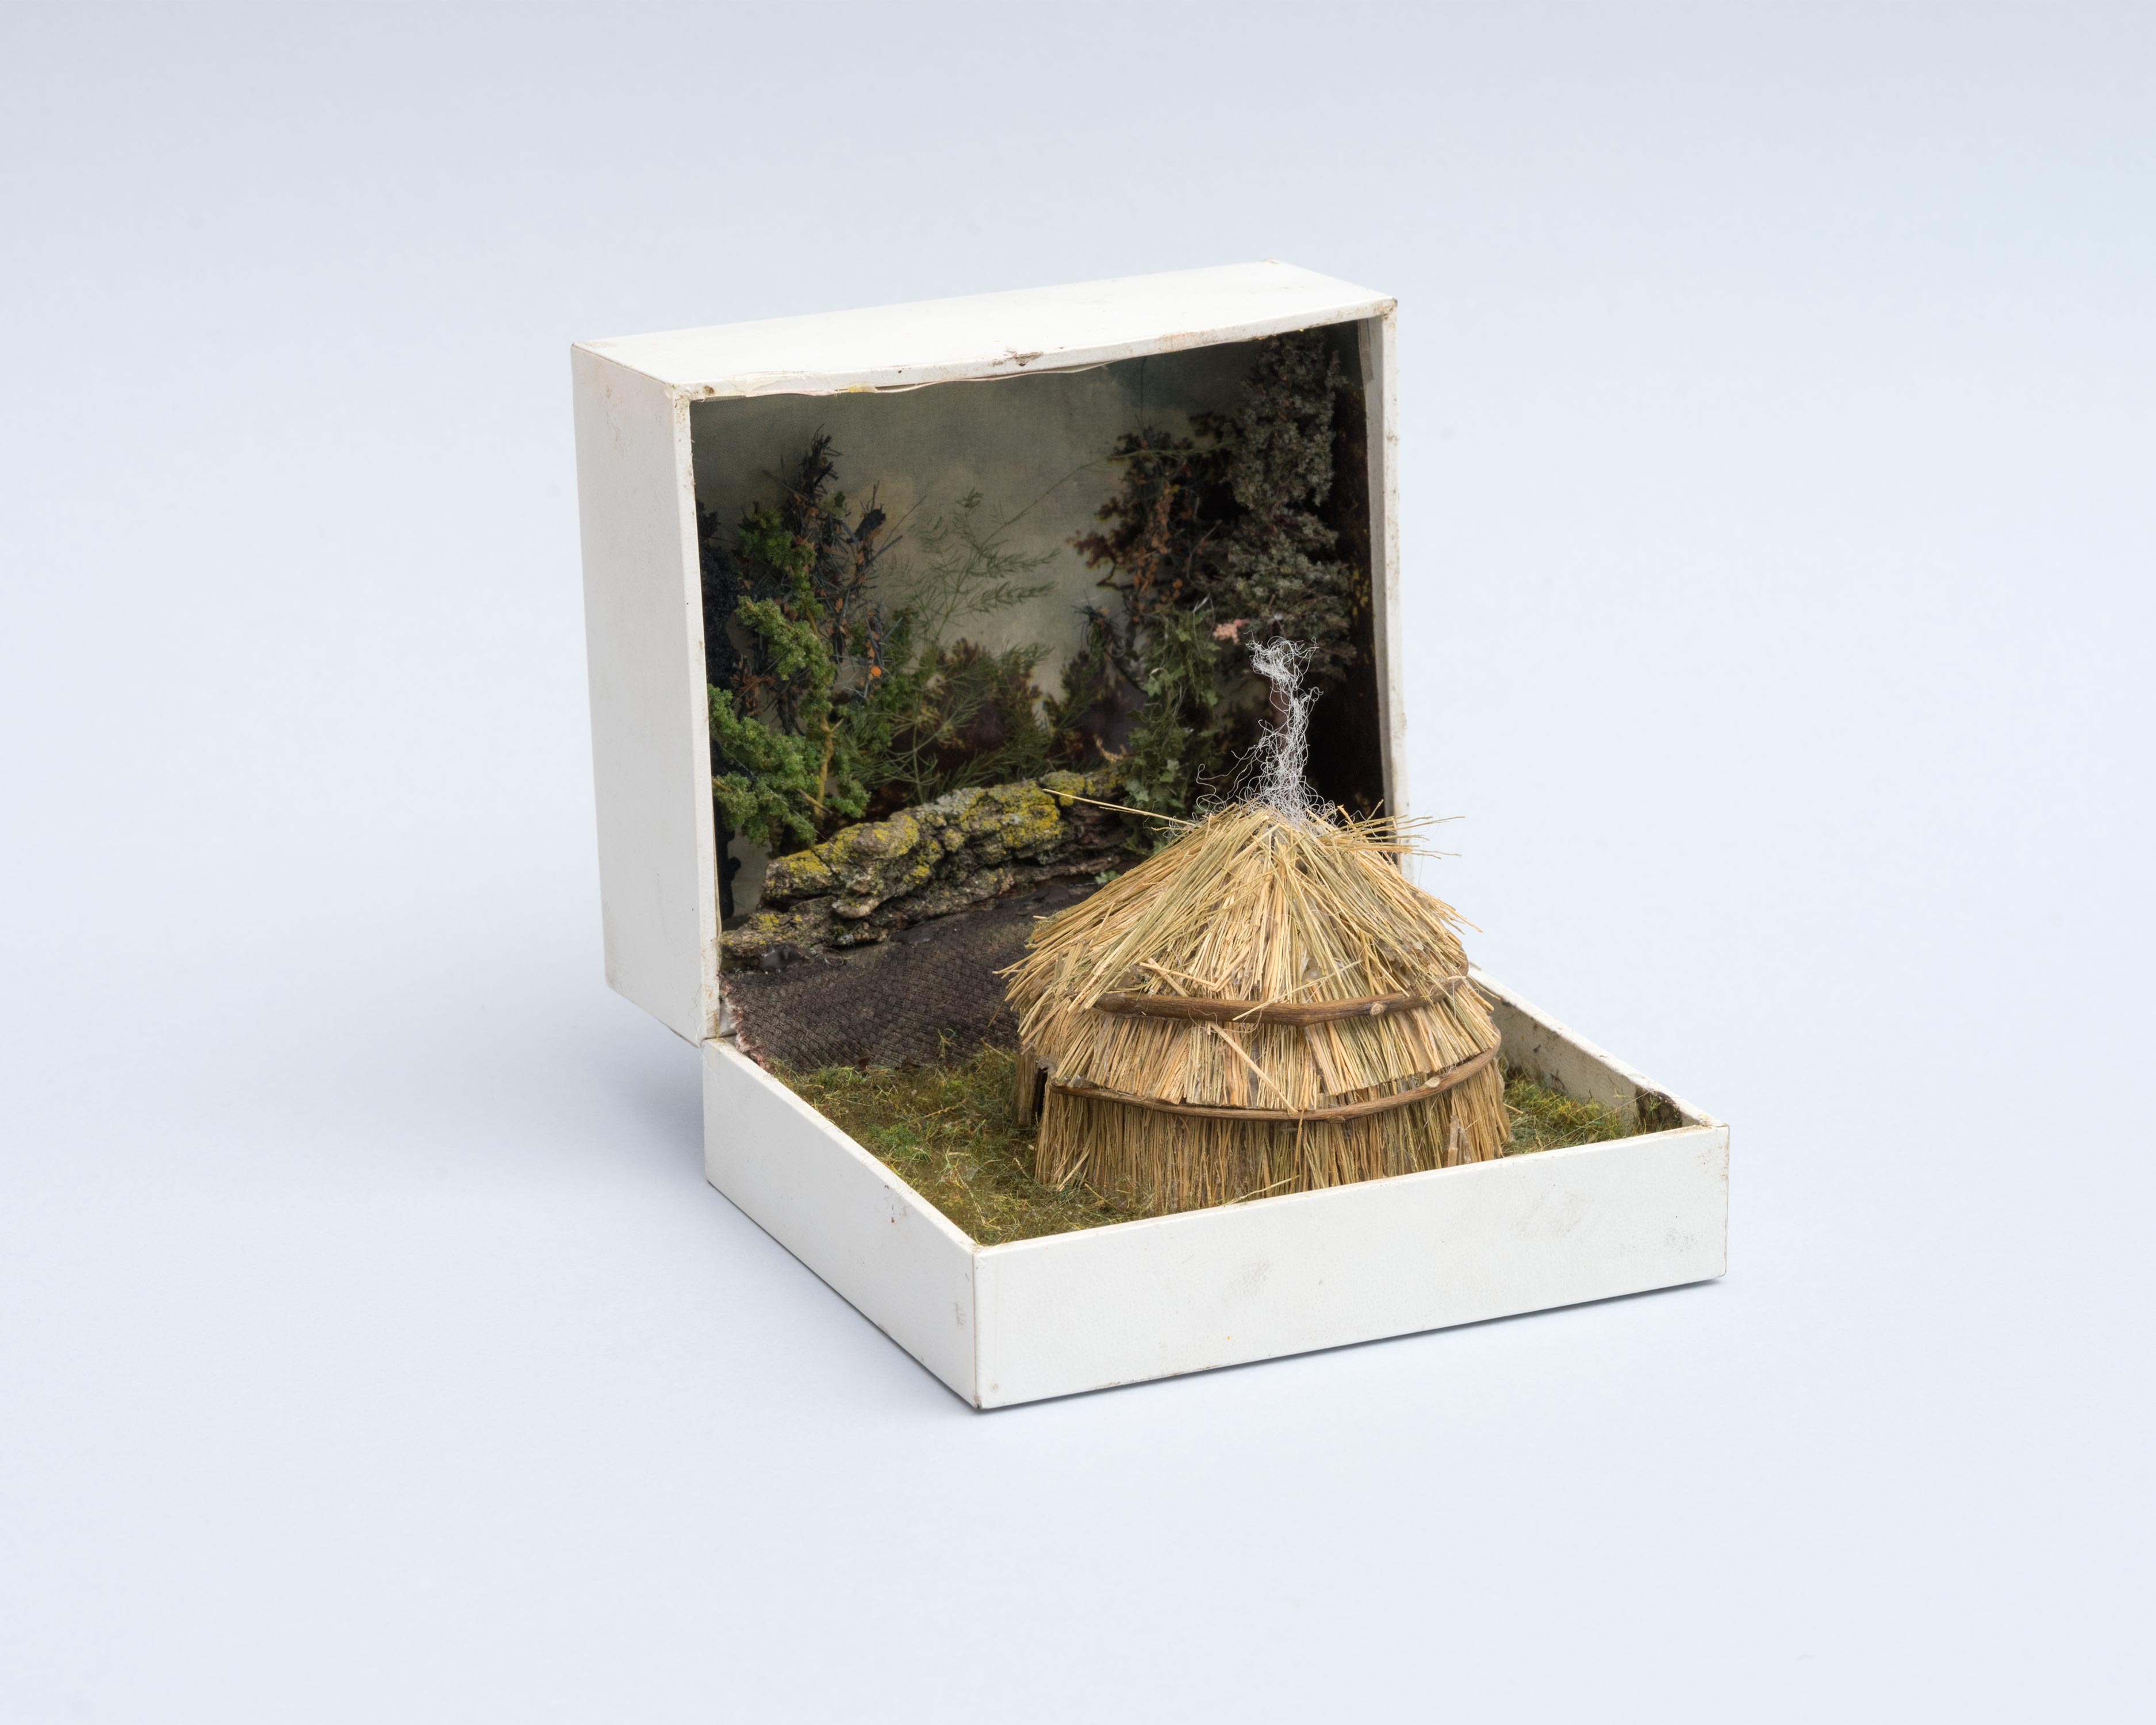 Curtis Talwst Santiago<br>Lenape Wigwam in Clearing<br>2016<br>Mixed media diorama in reclaimed jewelry box<br>3.875 x 3.3 x 4 in (9.8 x 8.4 x 10.2 cm)